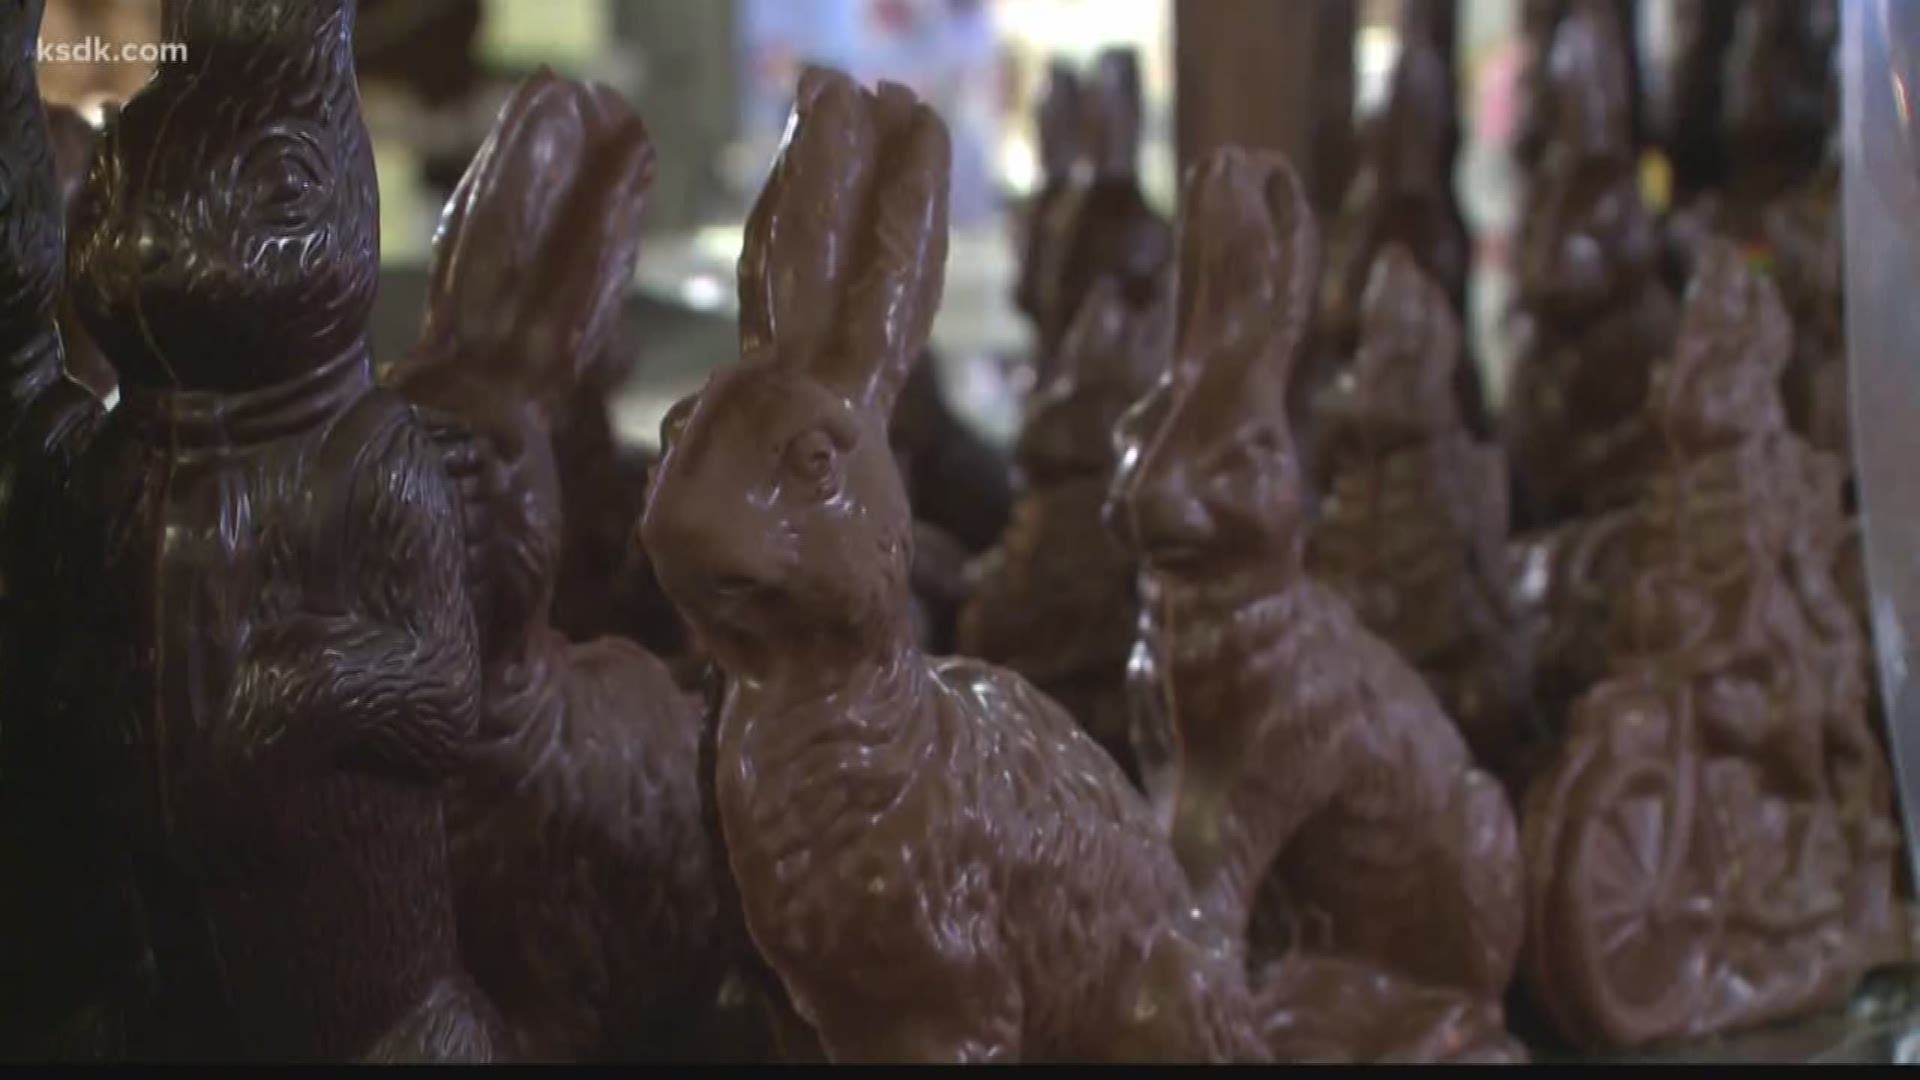 Crown Candy bunnies hopping off the shelves